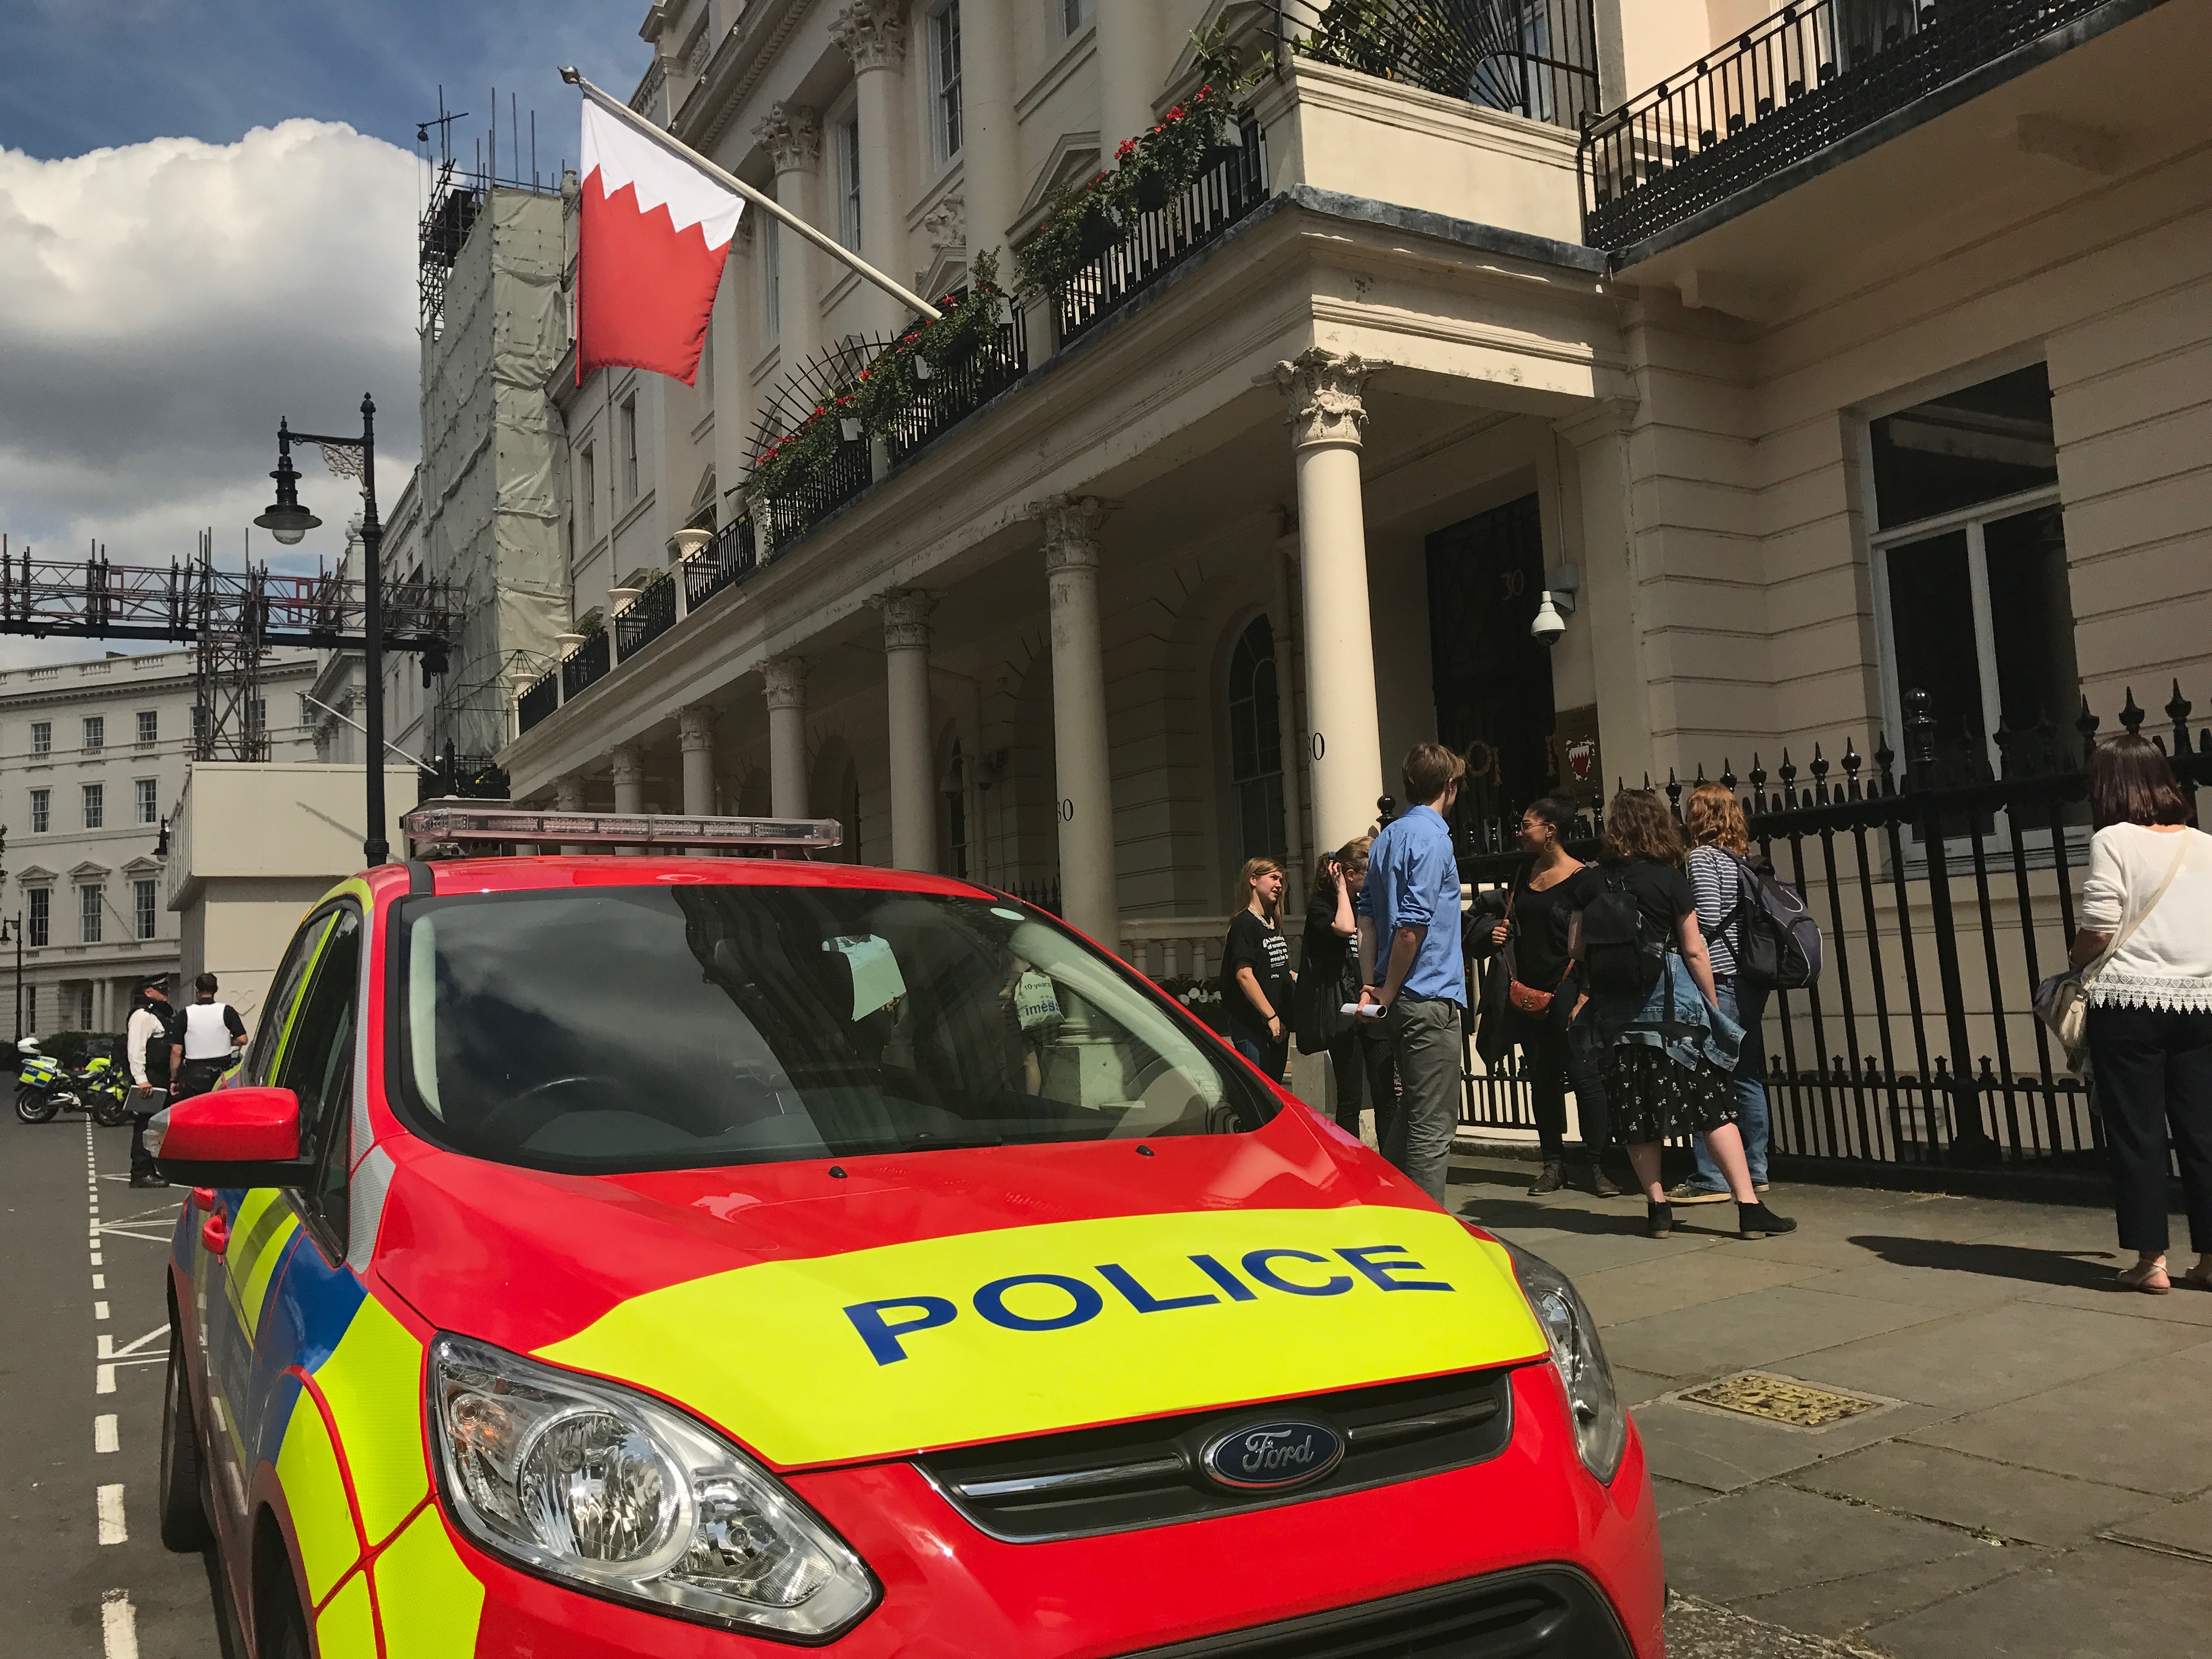 Protester arrested during demonstration at Bahrain Embassy in London